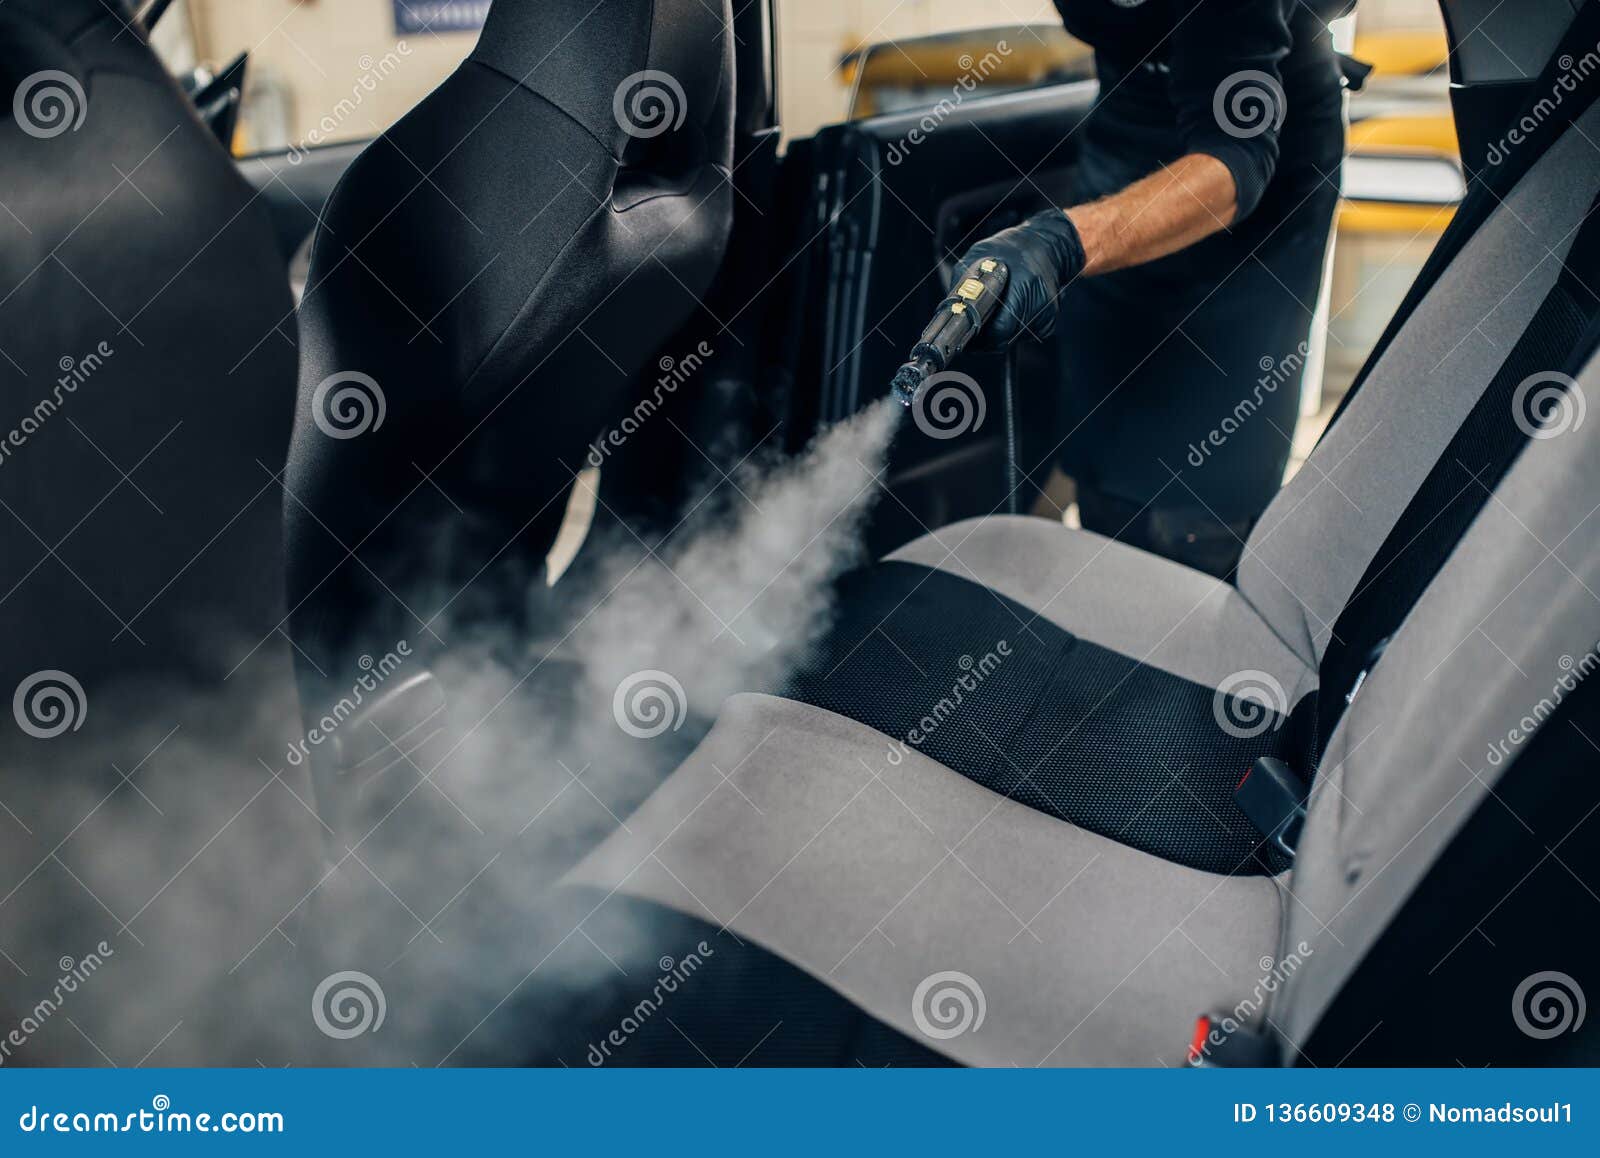 Dry Cleaning of Car Interior with Steam Cleaner Stock Image - Image of  cleansing, maintenance: 136609271